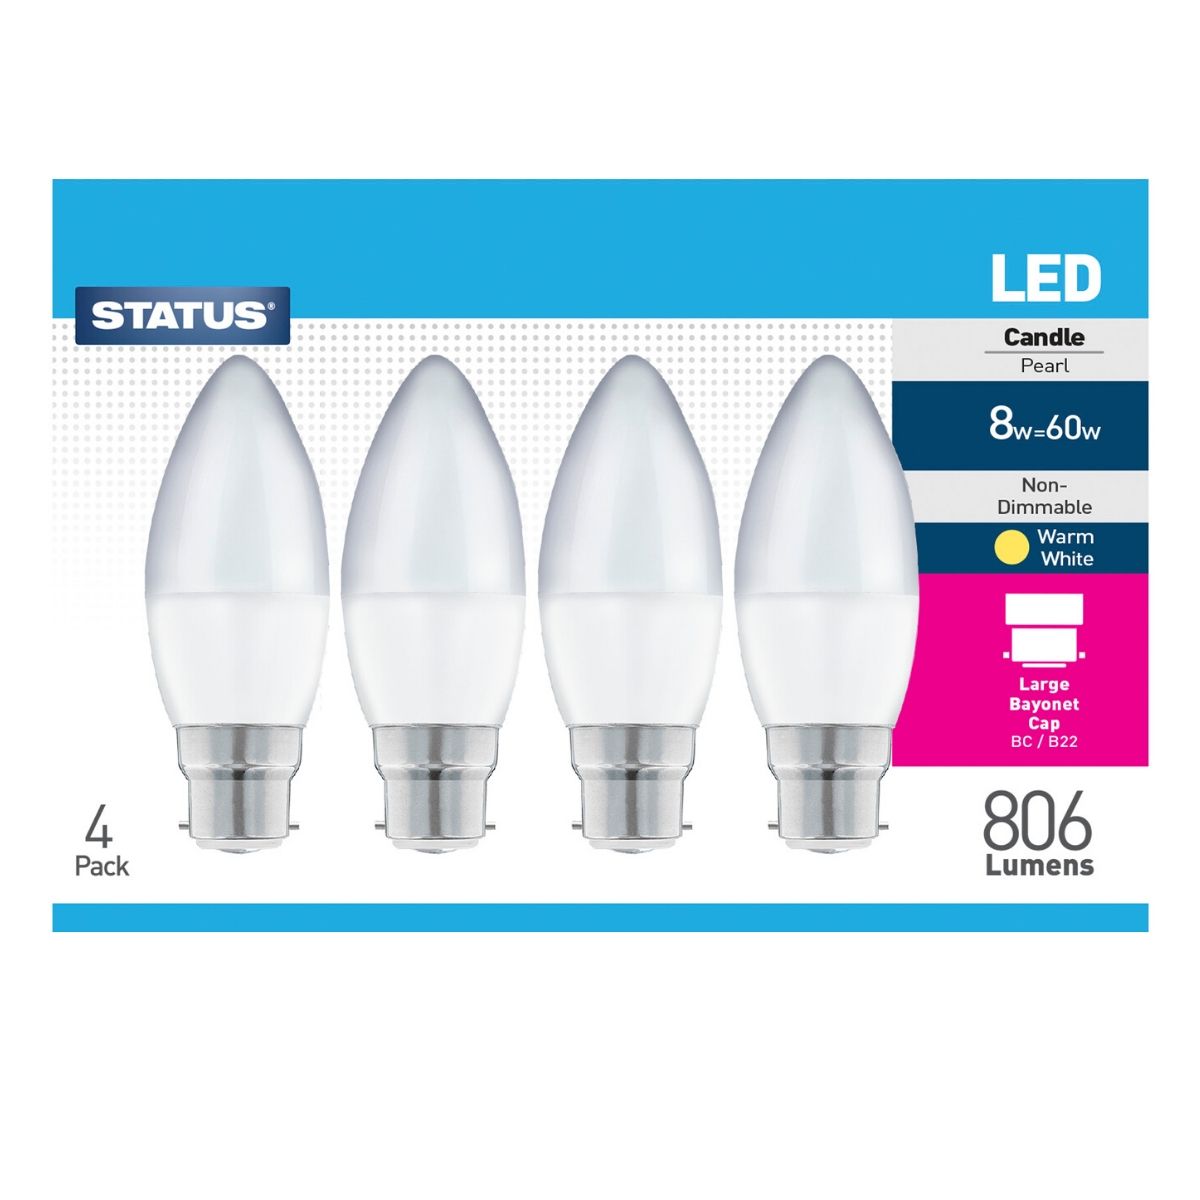 View 4 x LED Candle Bulbs B22 Warm White information